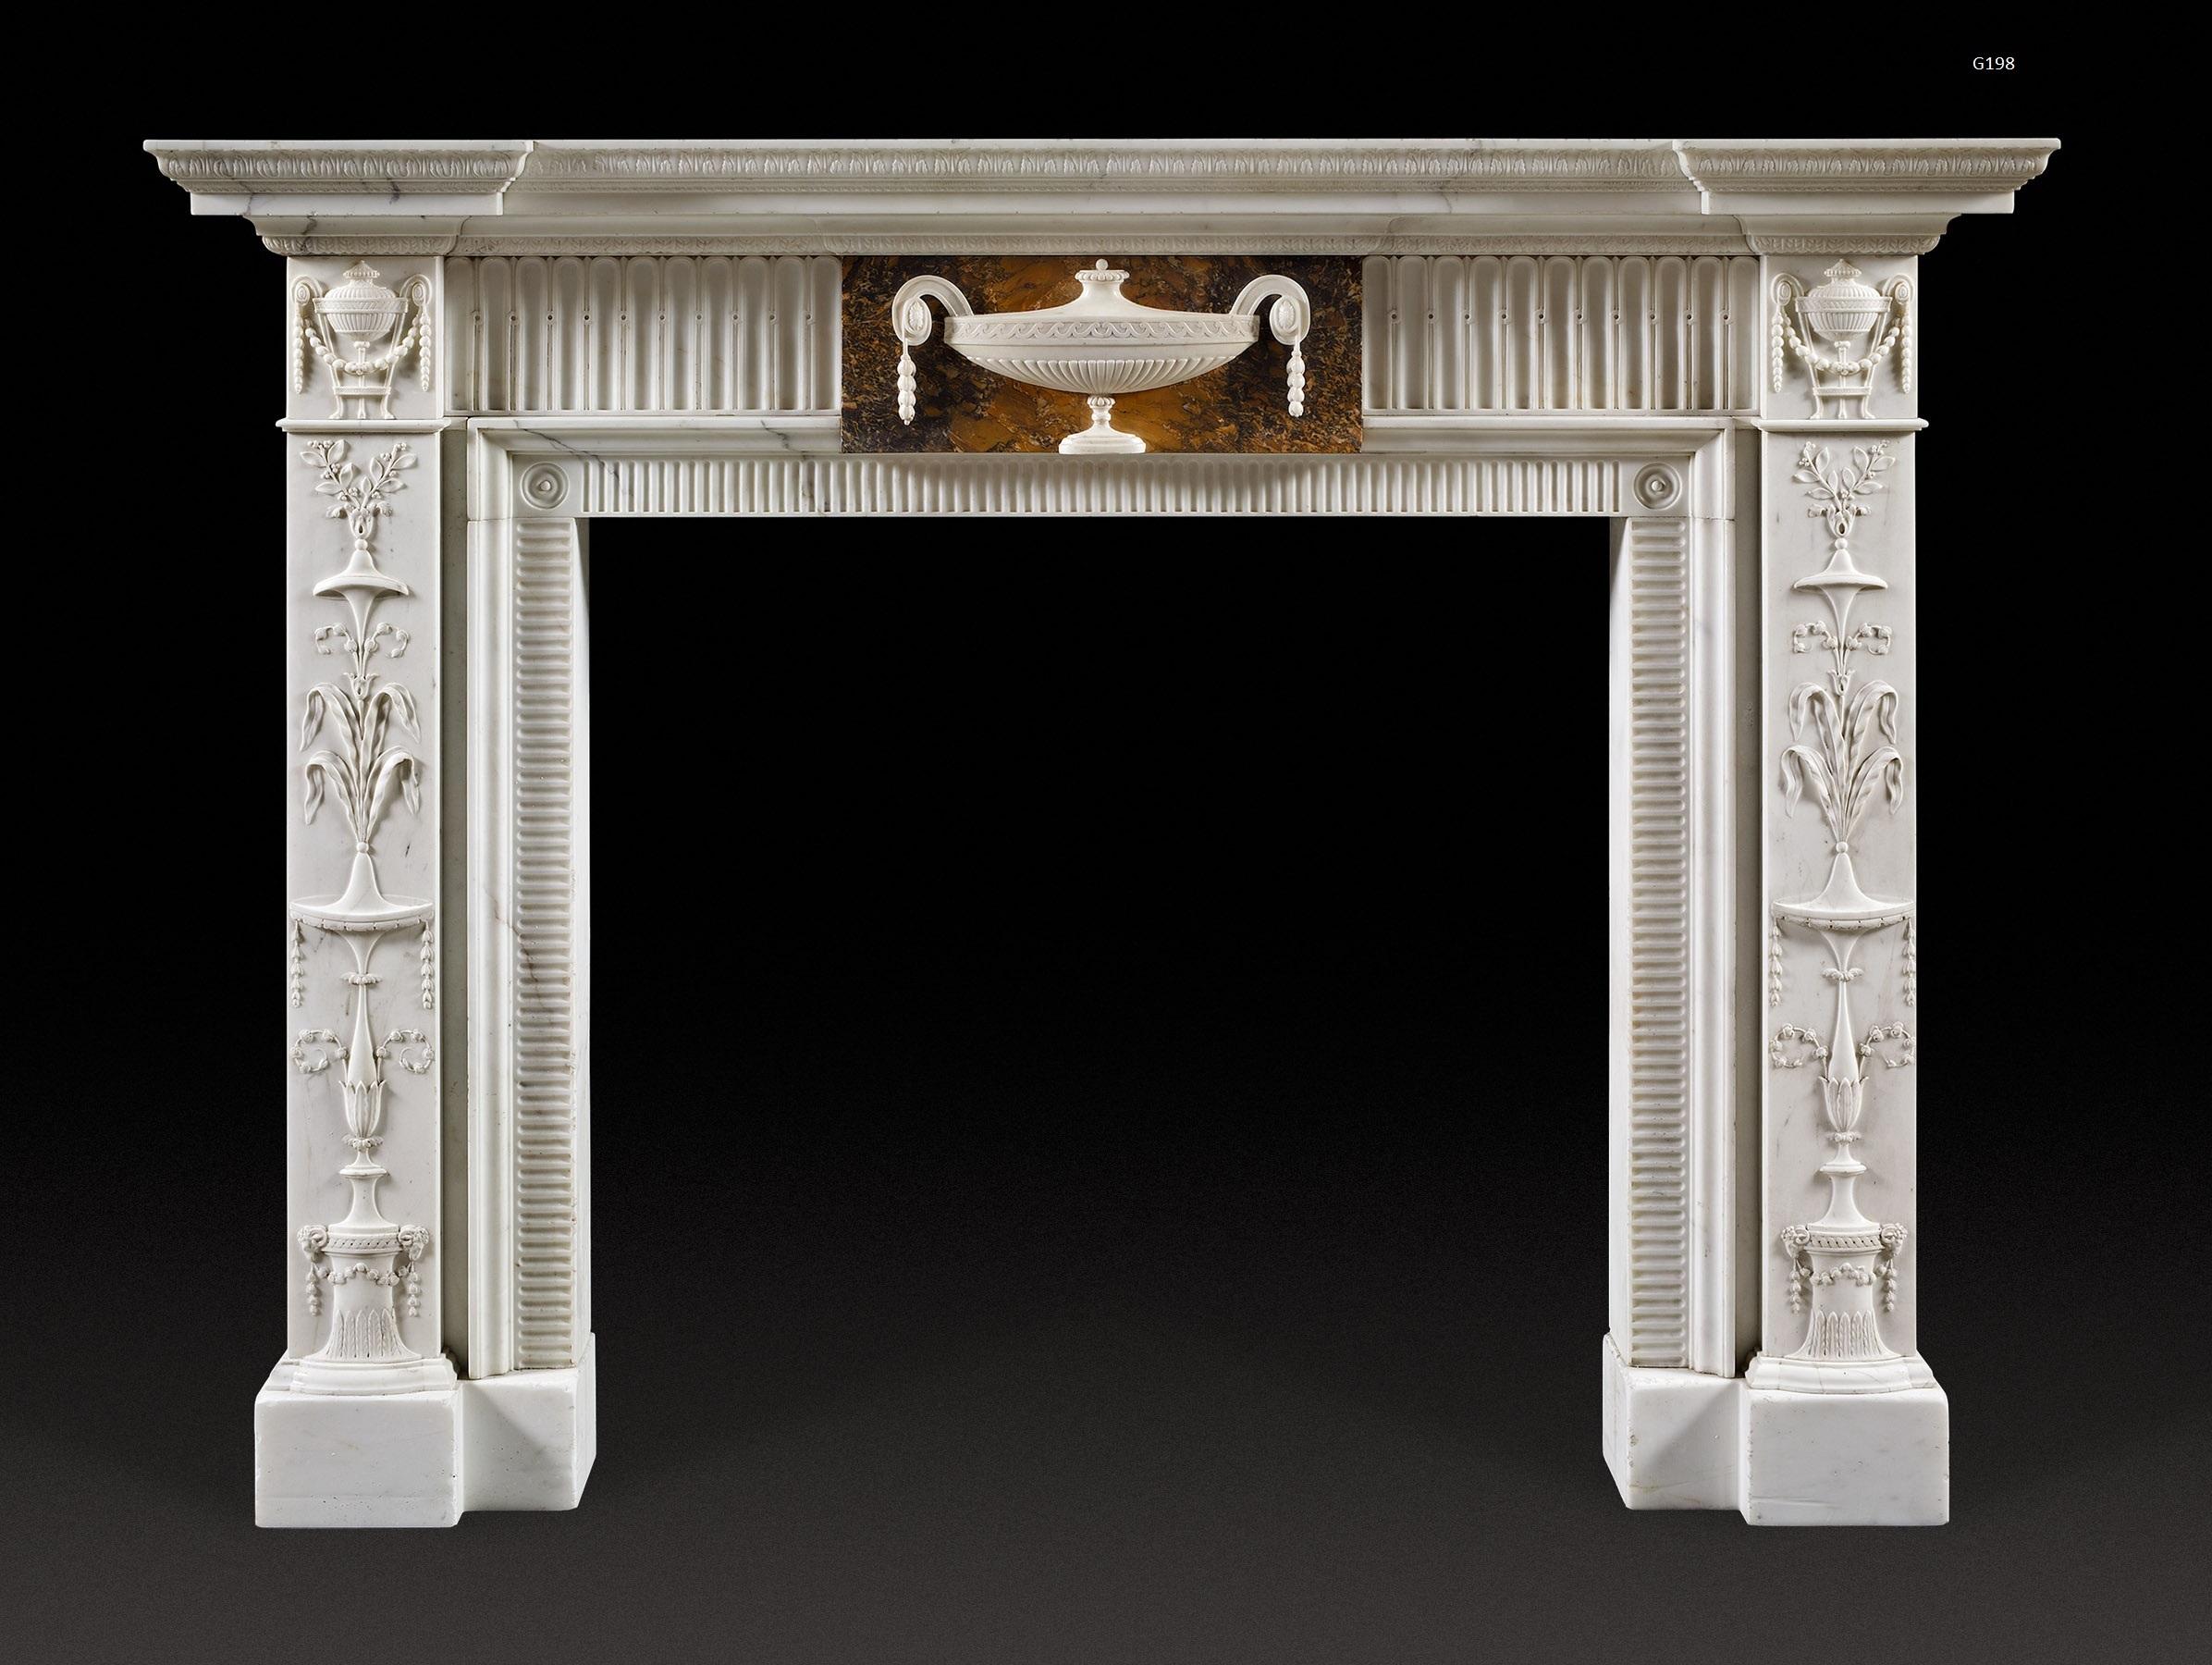 The breakfront, moulded shelf above the frieze which is centred with a tablet carved with tazza shaped, lidded urn in statuary on sienna marble. This is flanked by bands of flutes; the blockings above the pilaster, arabesque decorated jambs with